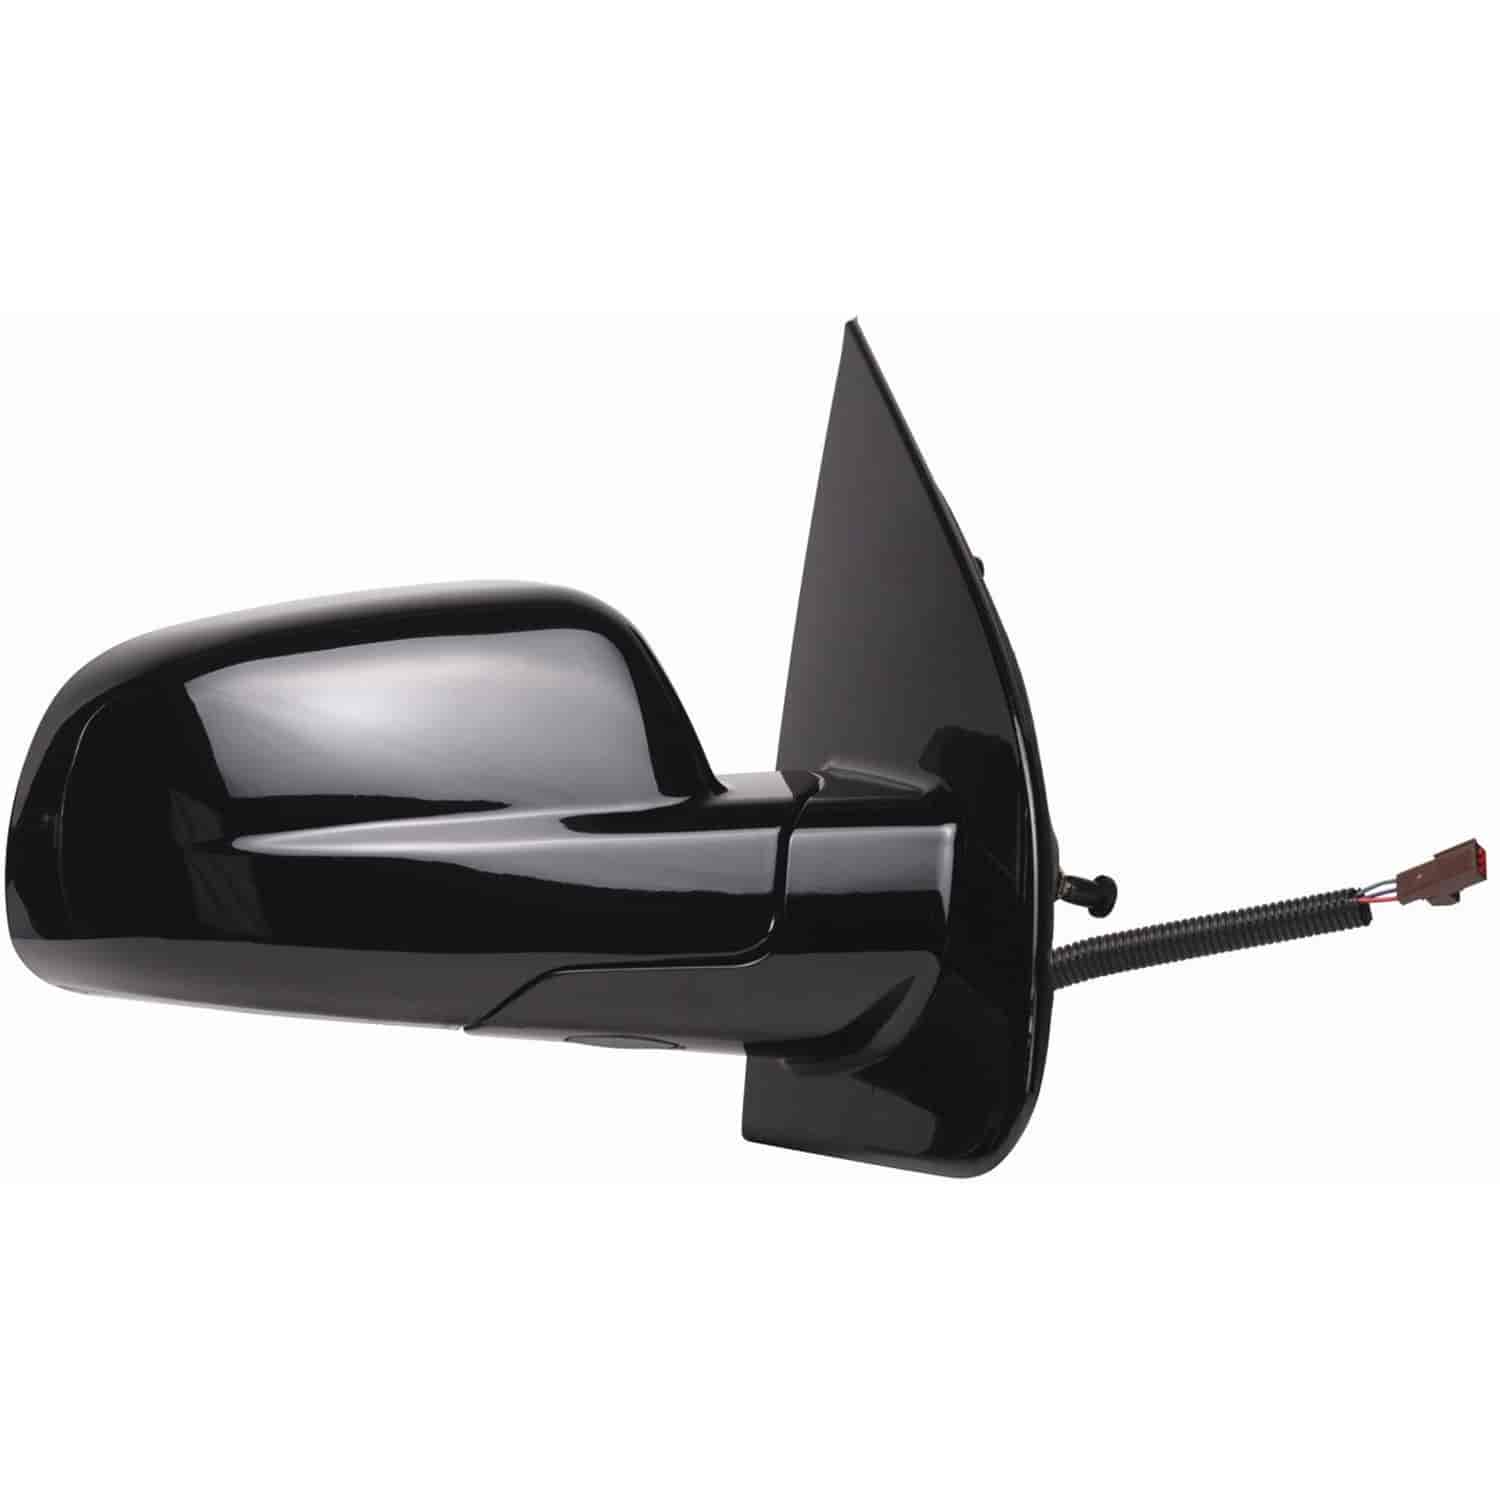 OEM Style Replacement mirror for 04-05 Ford Freestar w/o signal passenger side mirror tested to fit